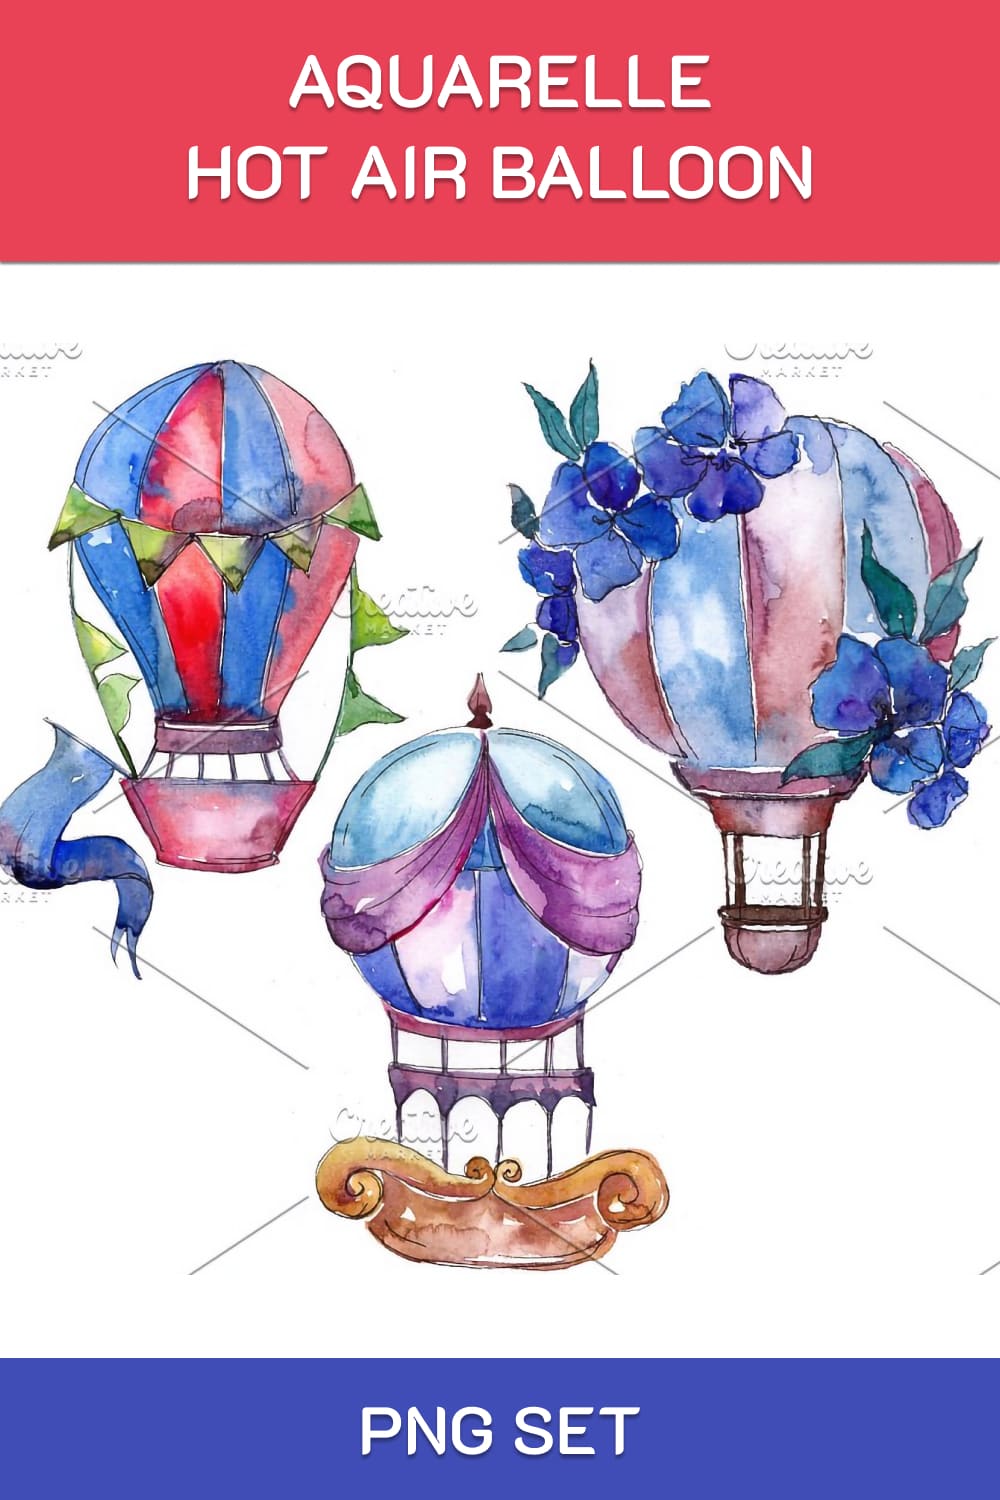 A pack of irresistible watercolor images with hot air balloons.